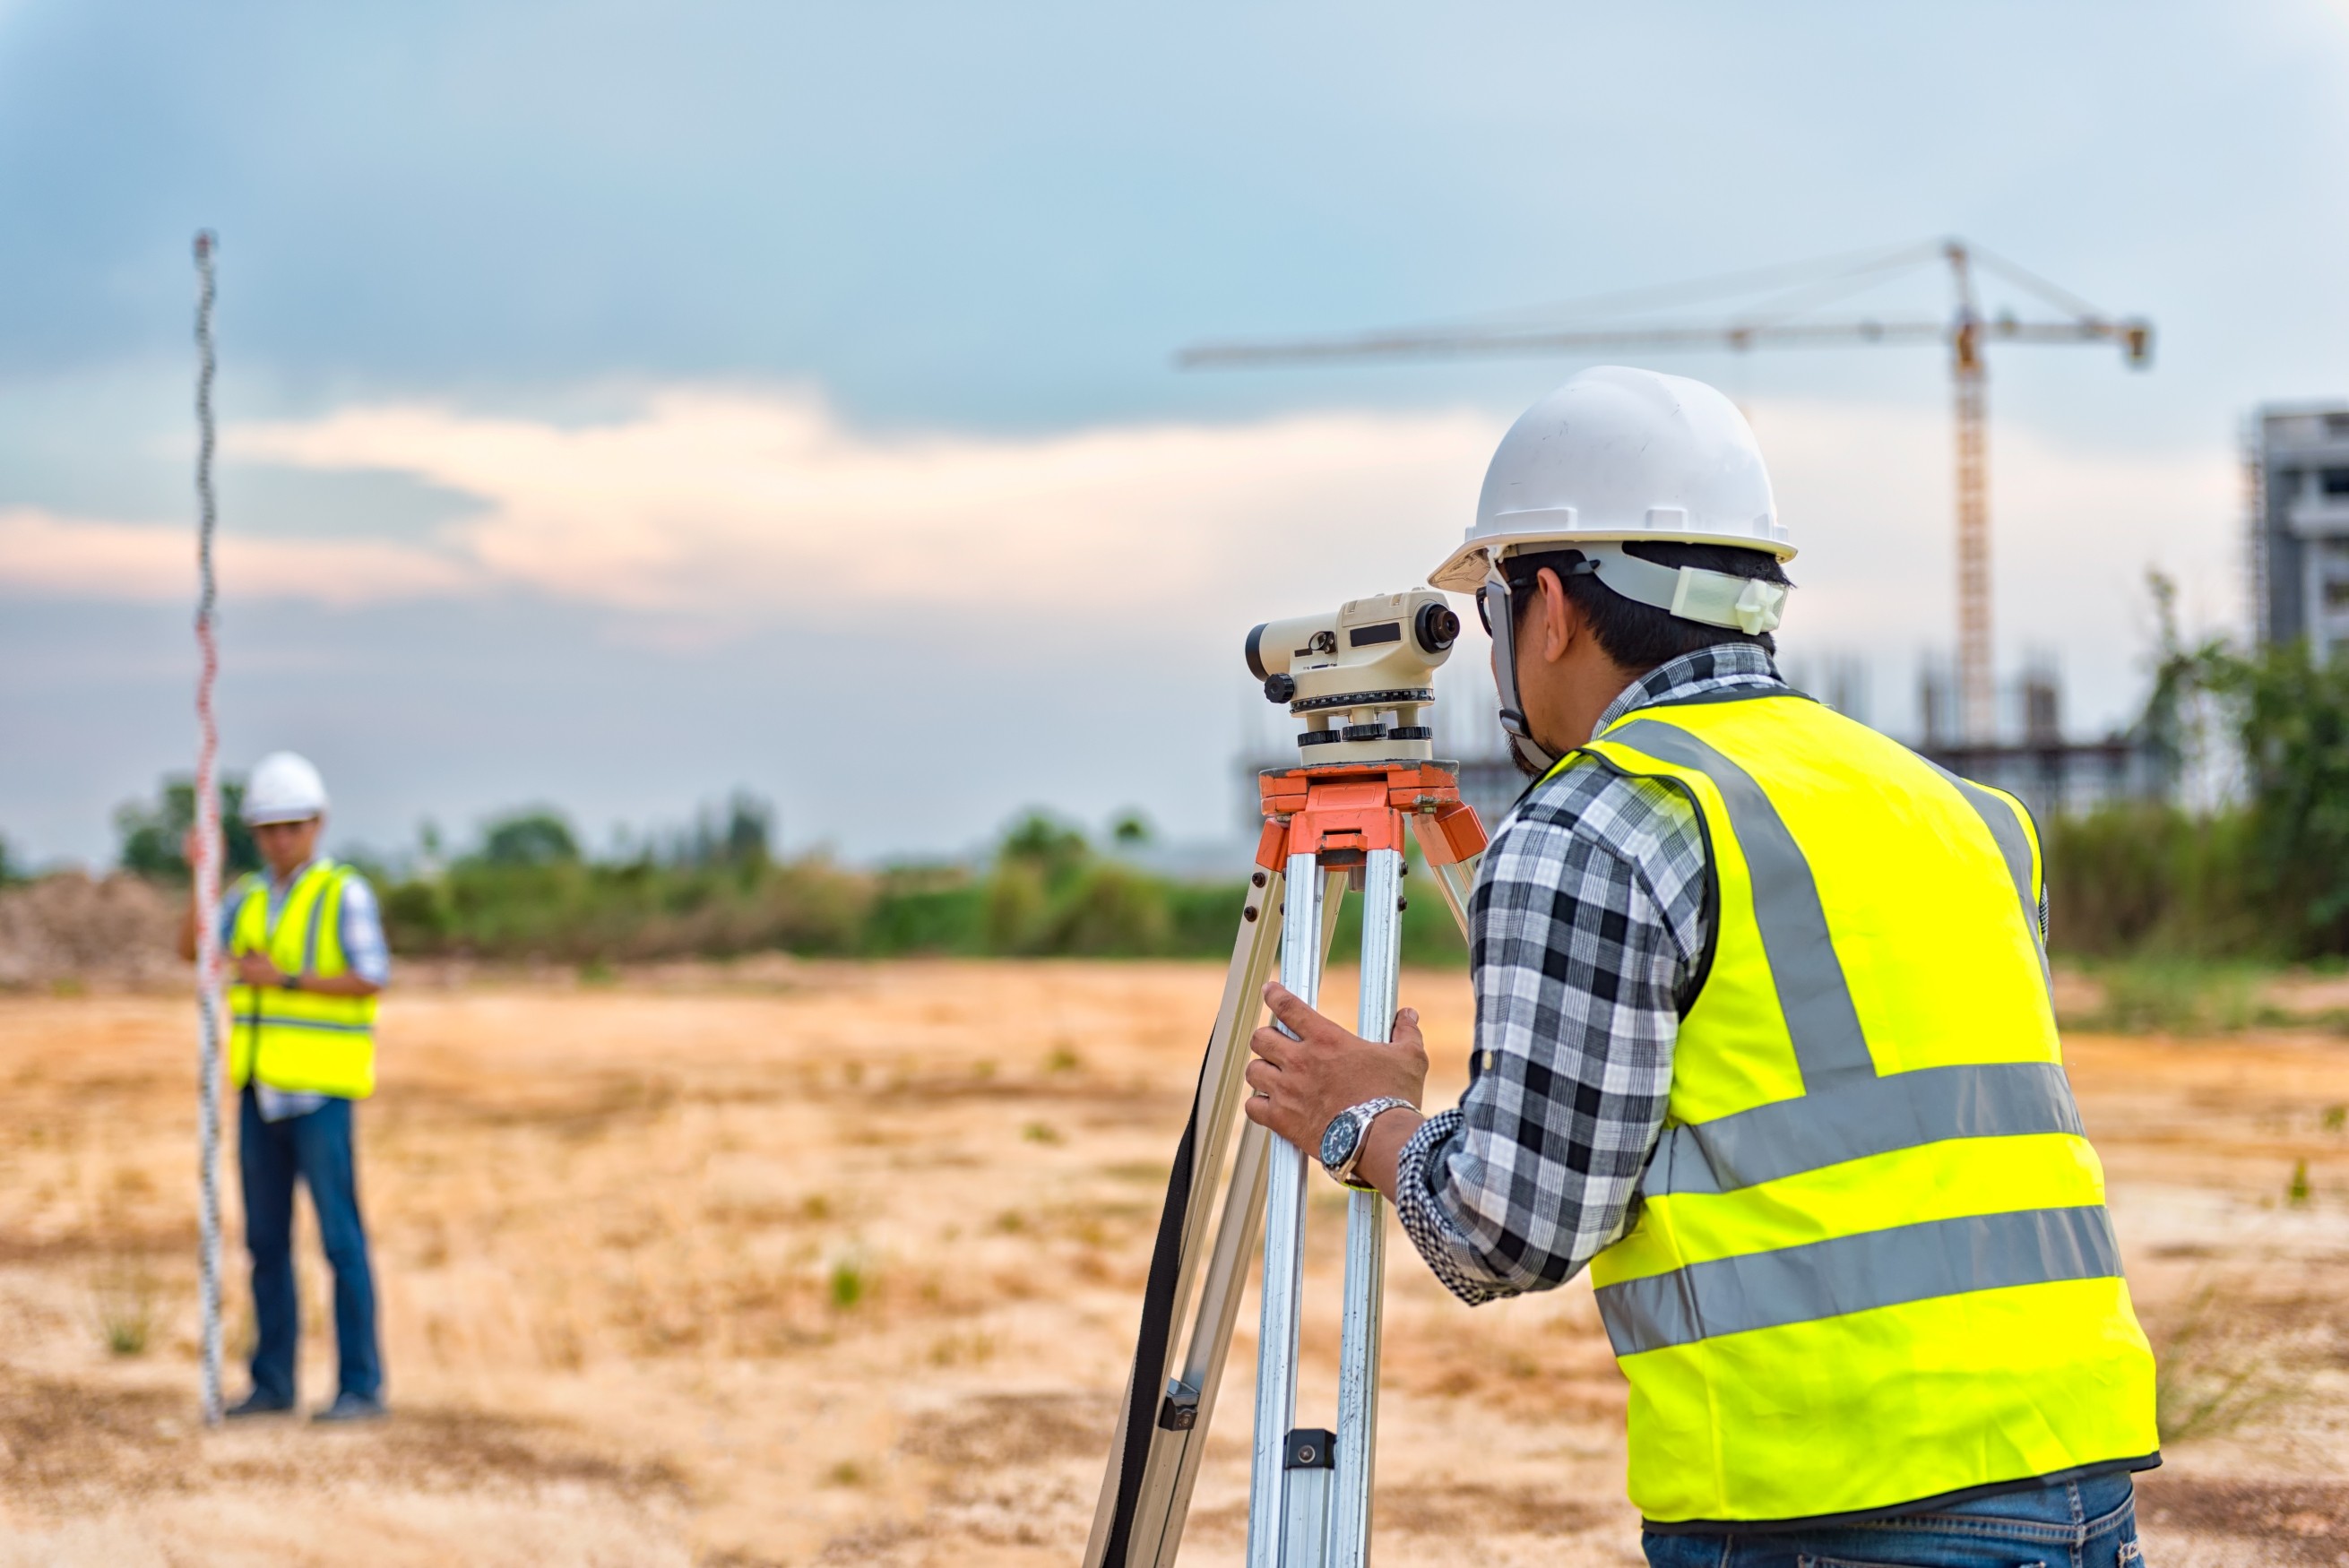 Surveyor Engineering  Surveyor’s telescope at construction site  Surveying for making contour plans are a graphical representation of the lay of the land before startup construction work